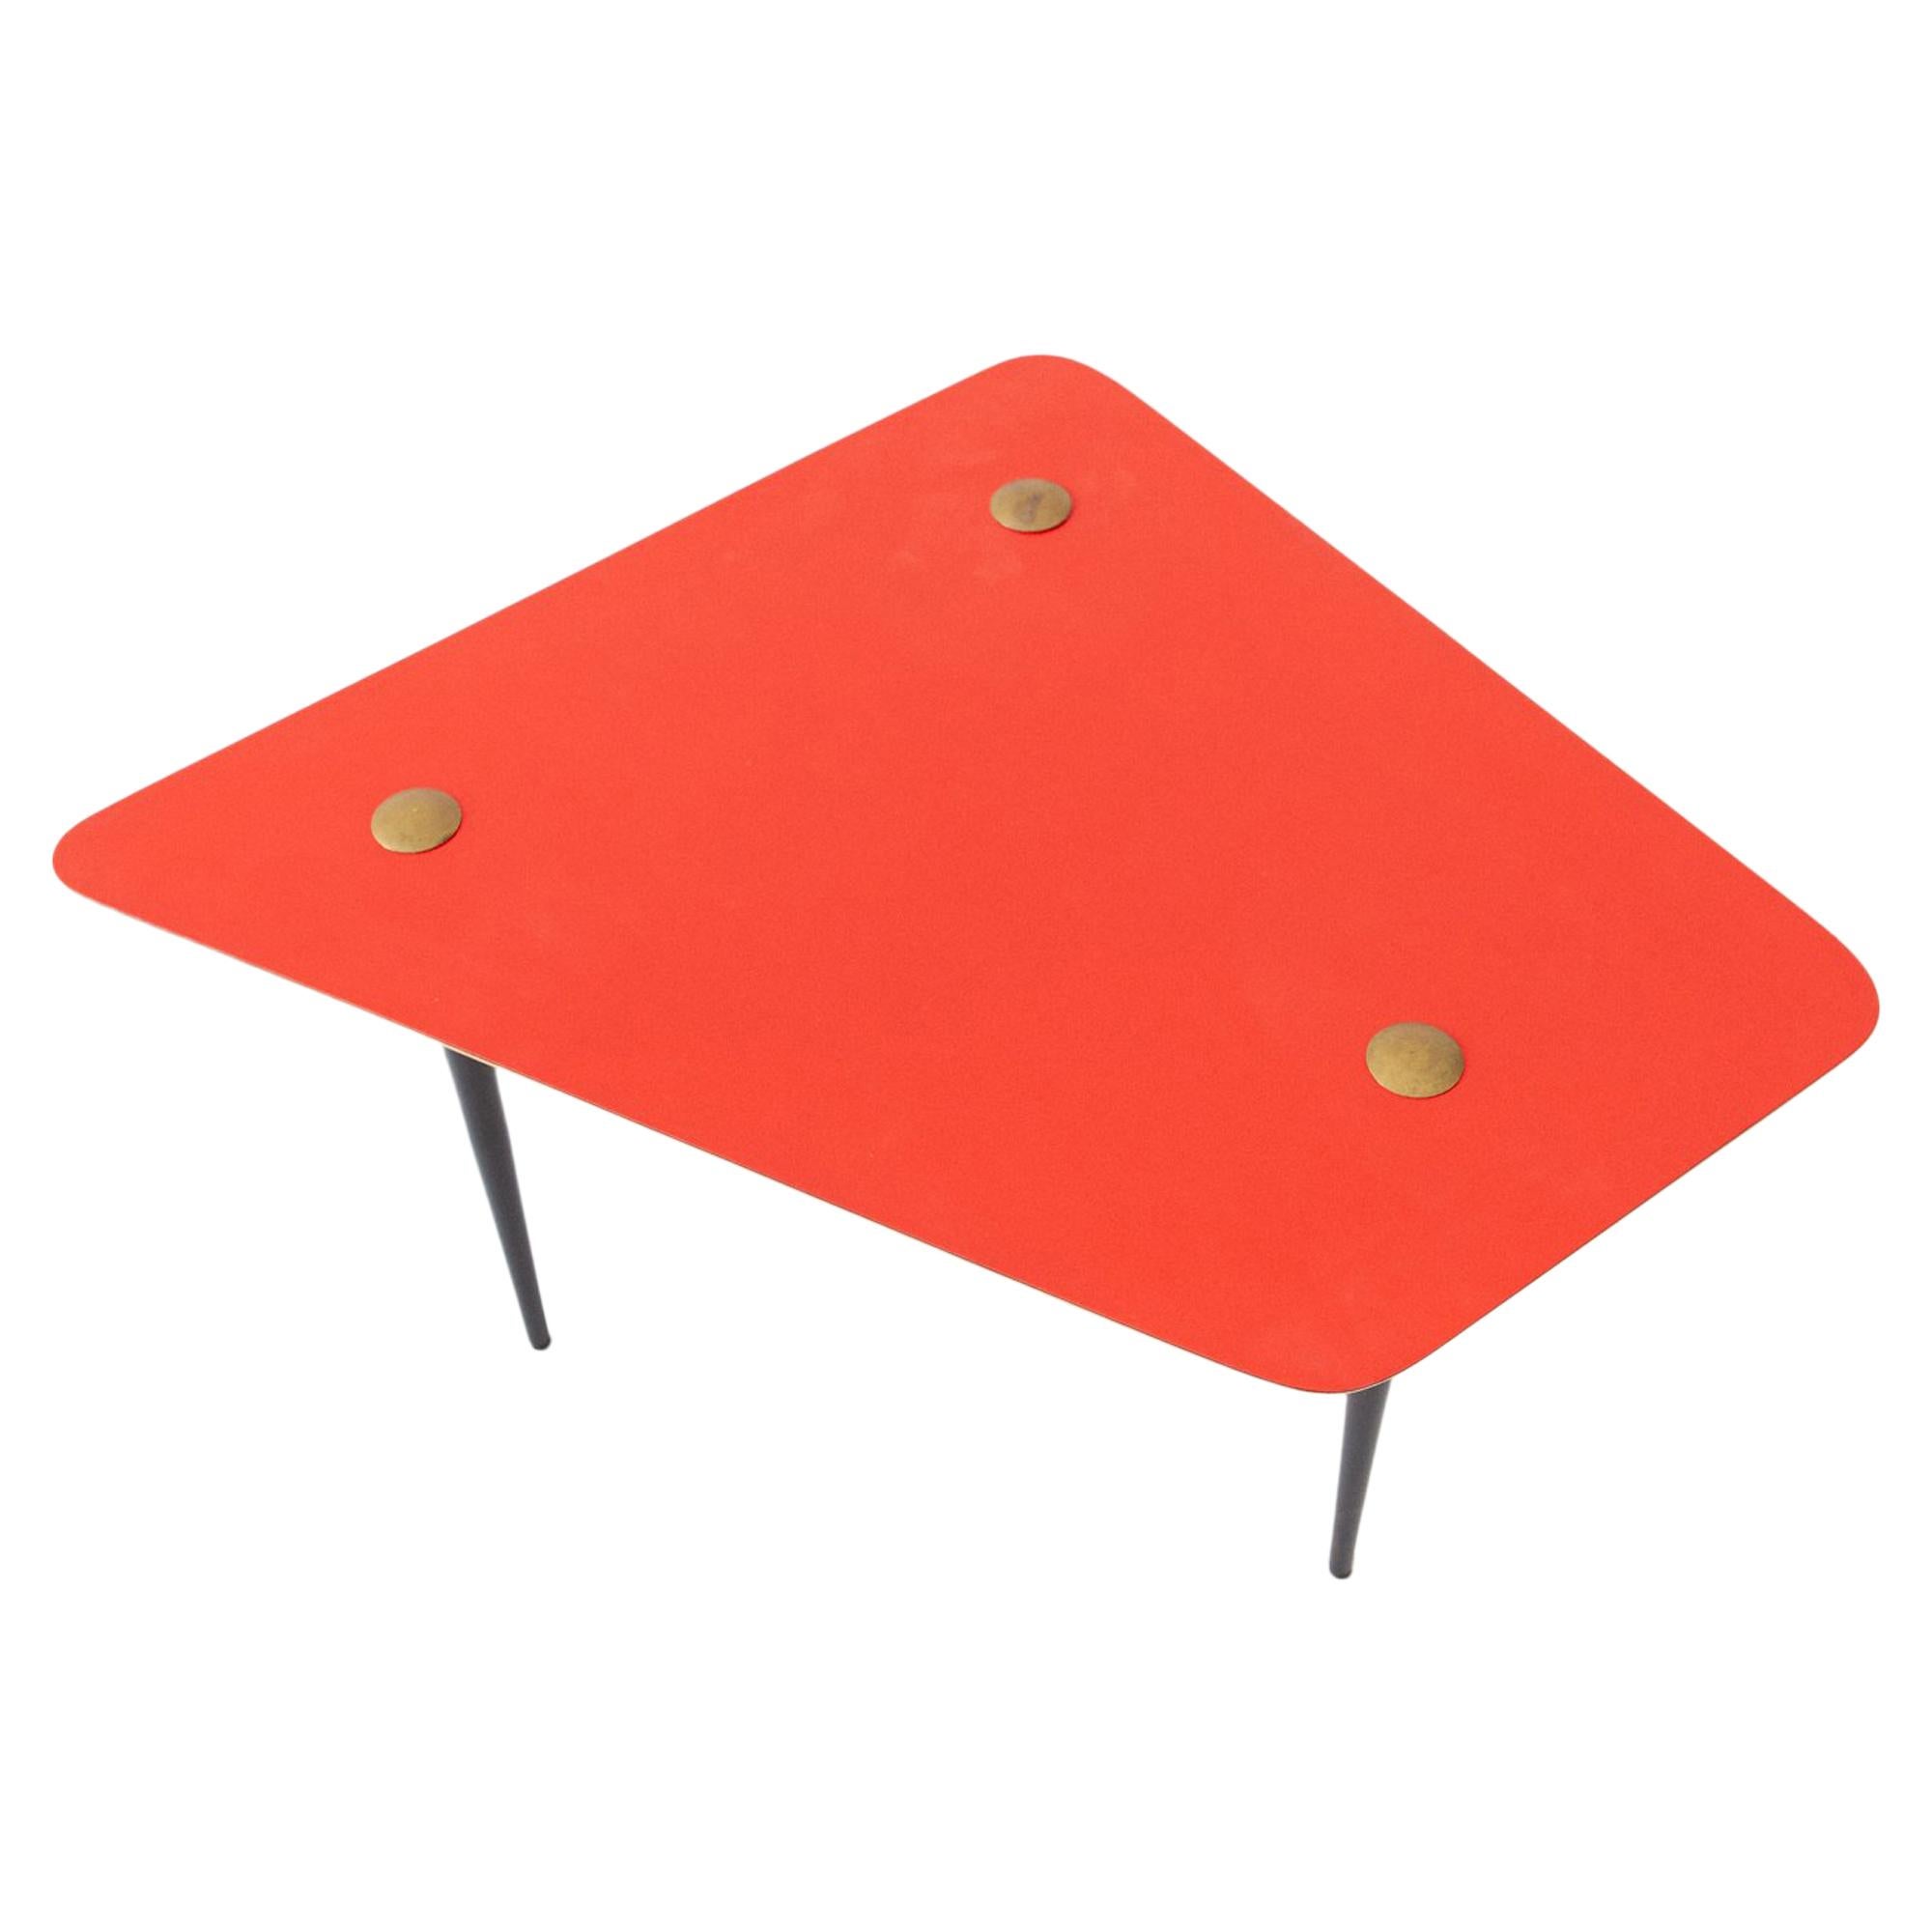 Italian Mid-Century Modern Soft Red and Brass Coffee Table, 1950s